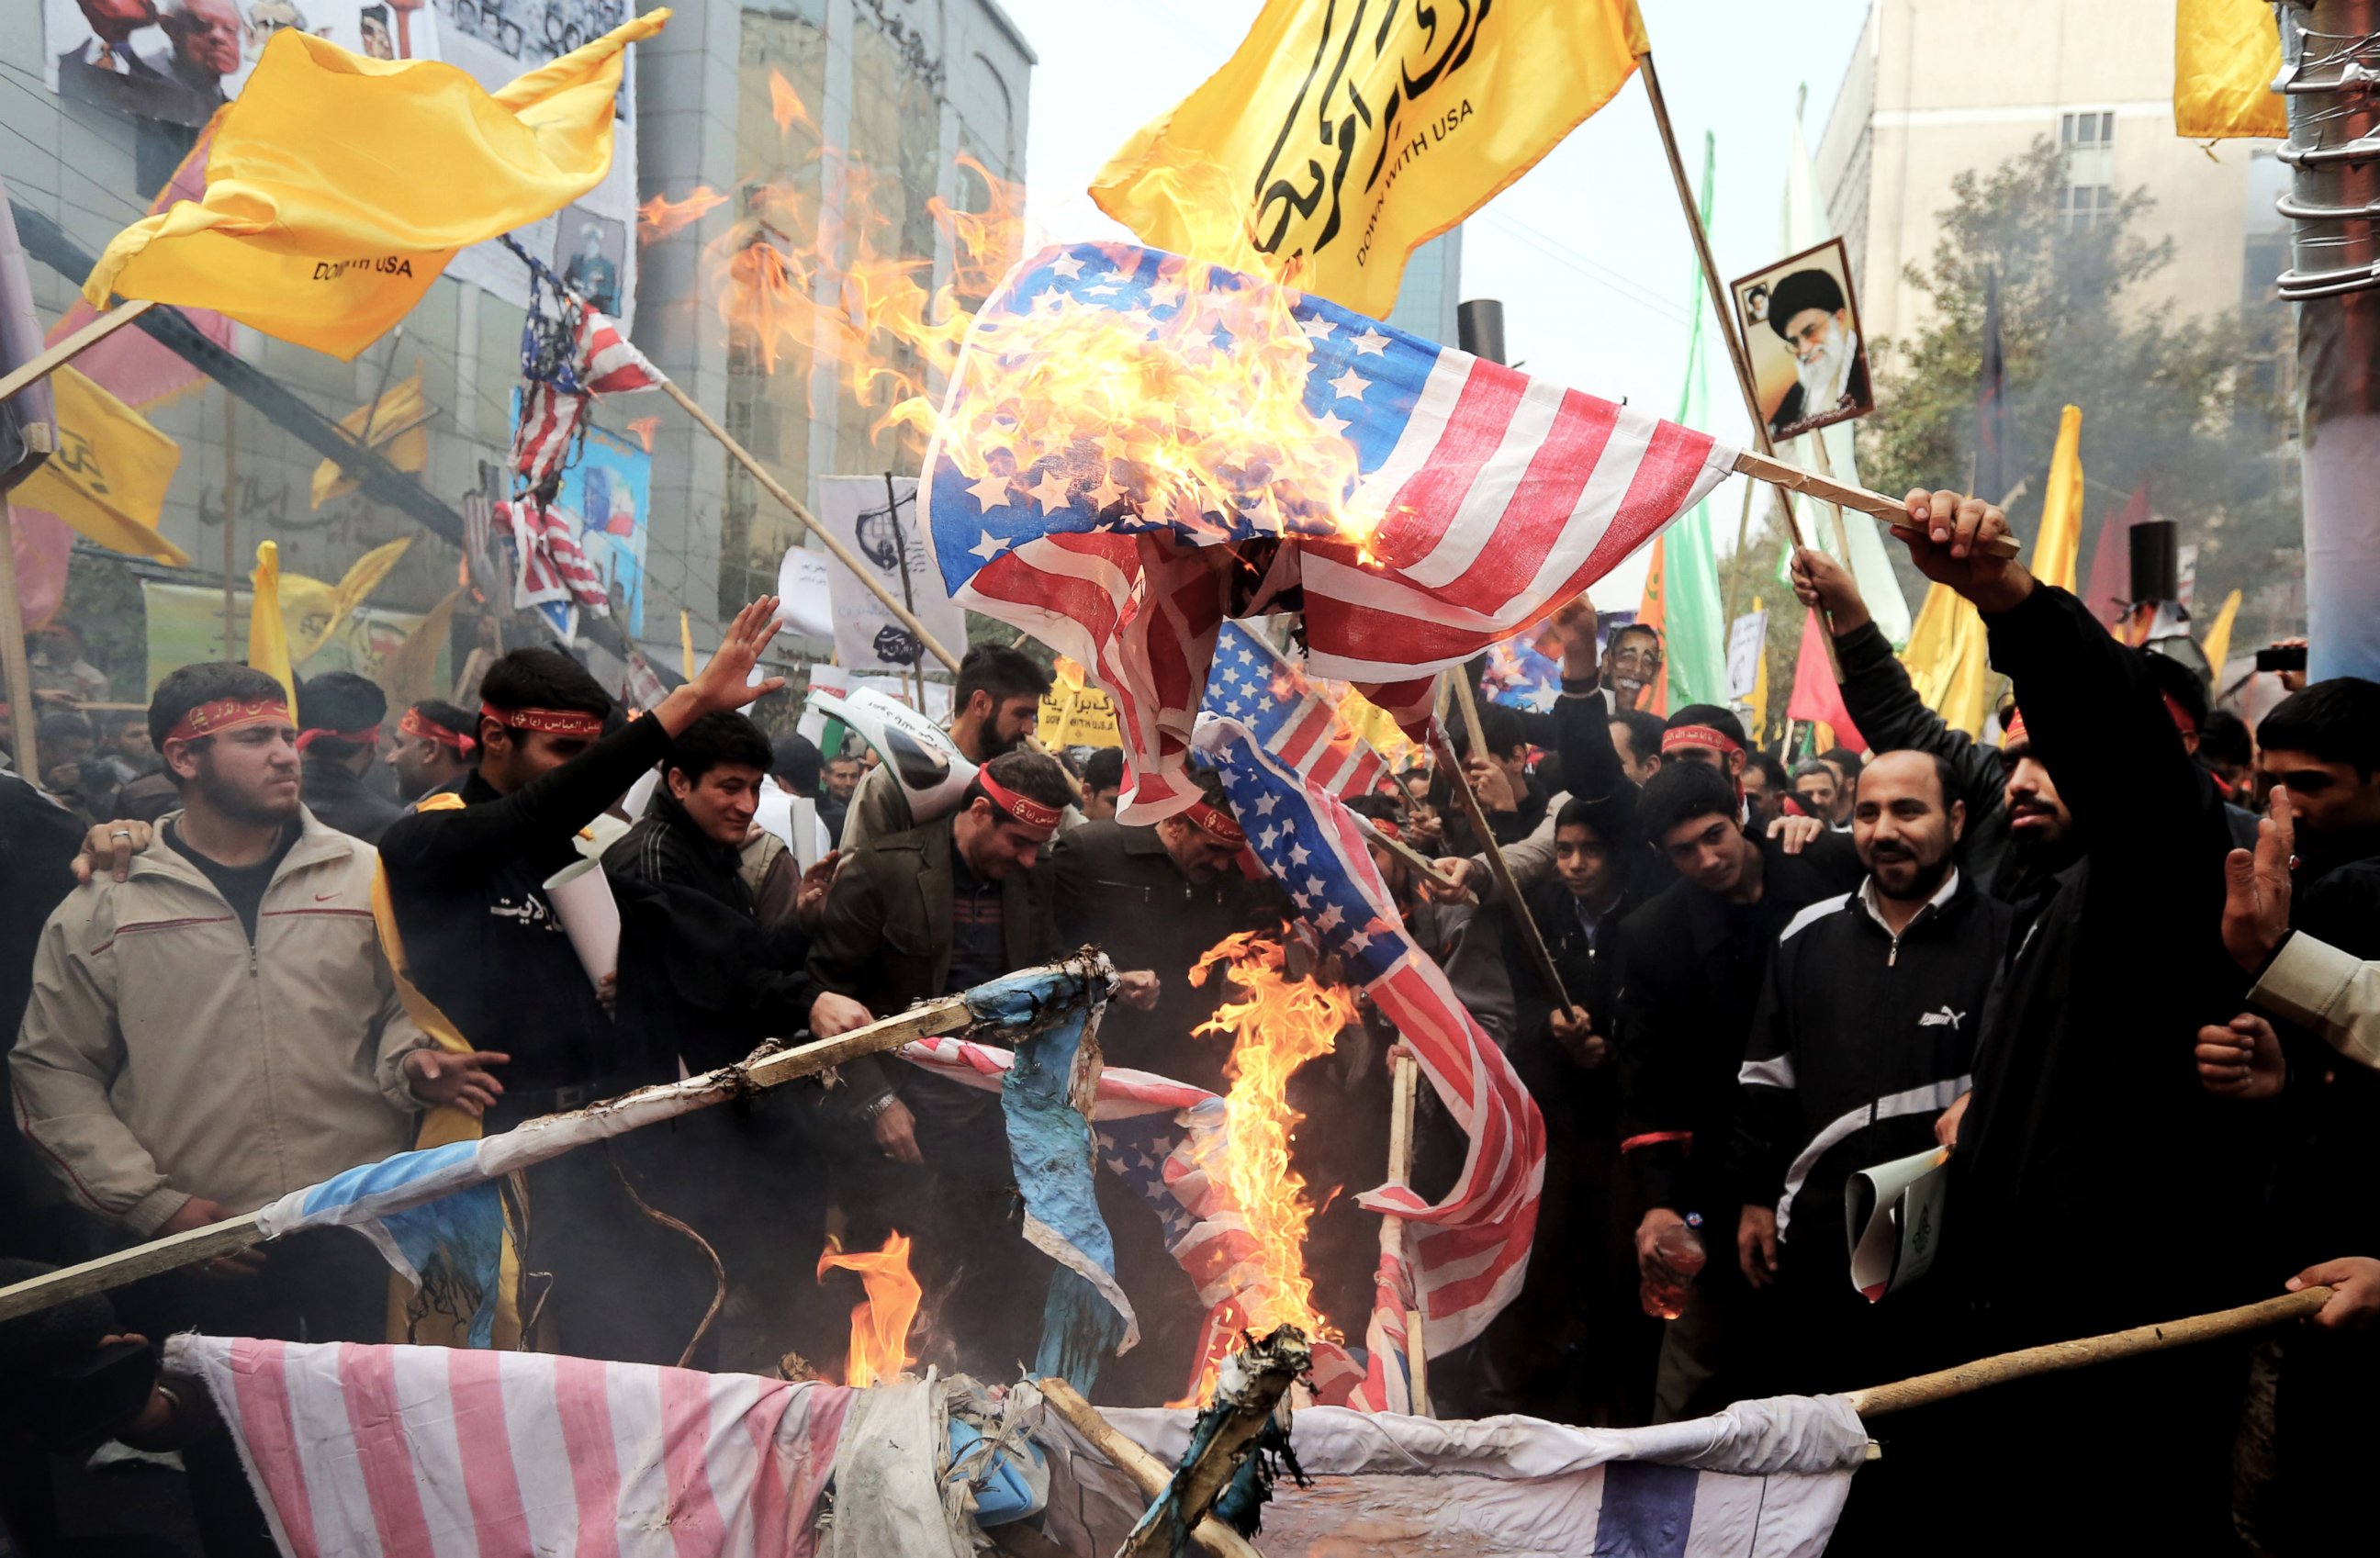 PHOTO: Iranians burn US flags outside the former US embassy in Tehran on Nov. 4, 2013, during a demonstration to mark the 34th anniversary of the 1979 US embassy takeover.